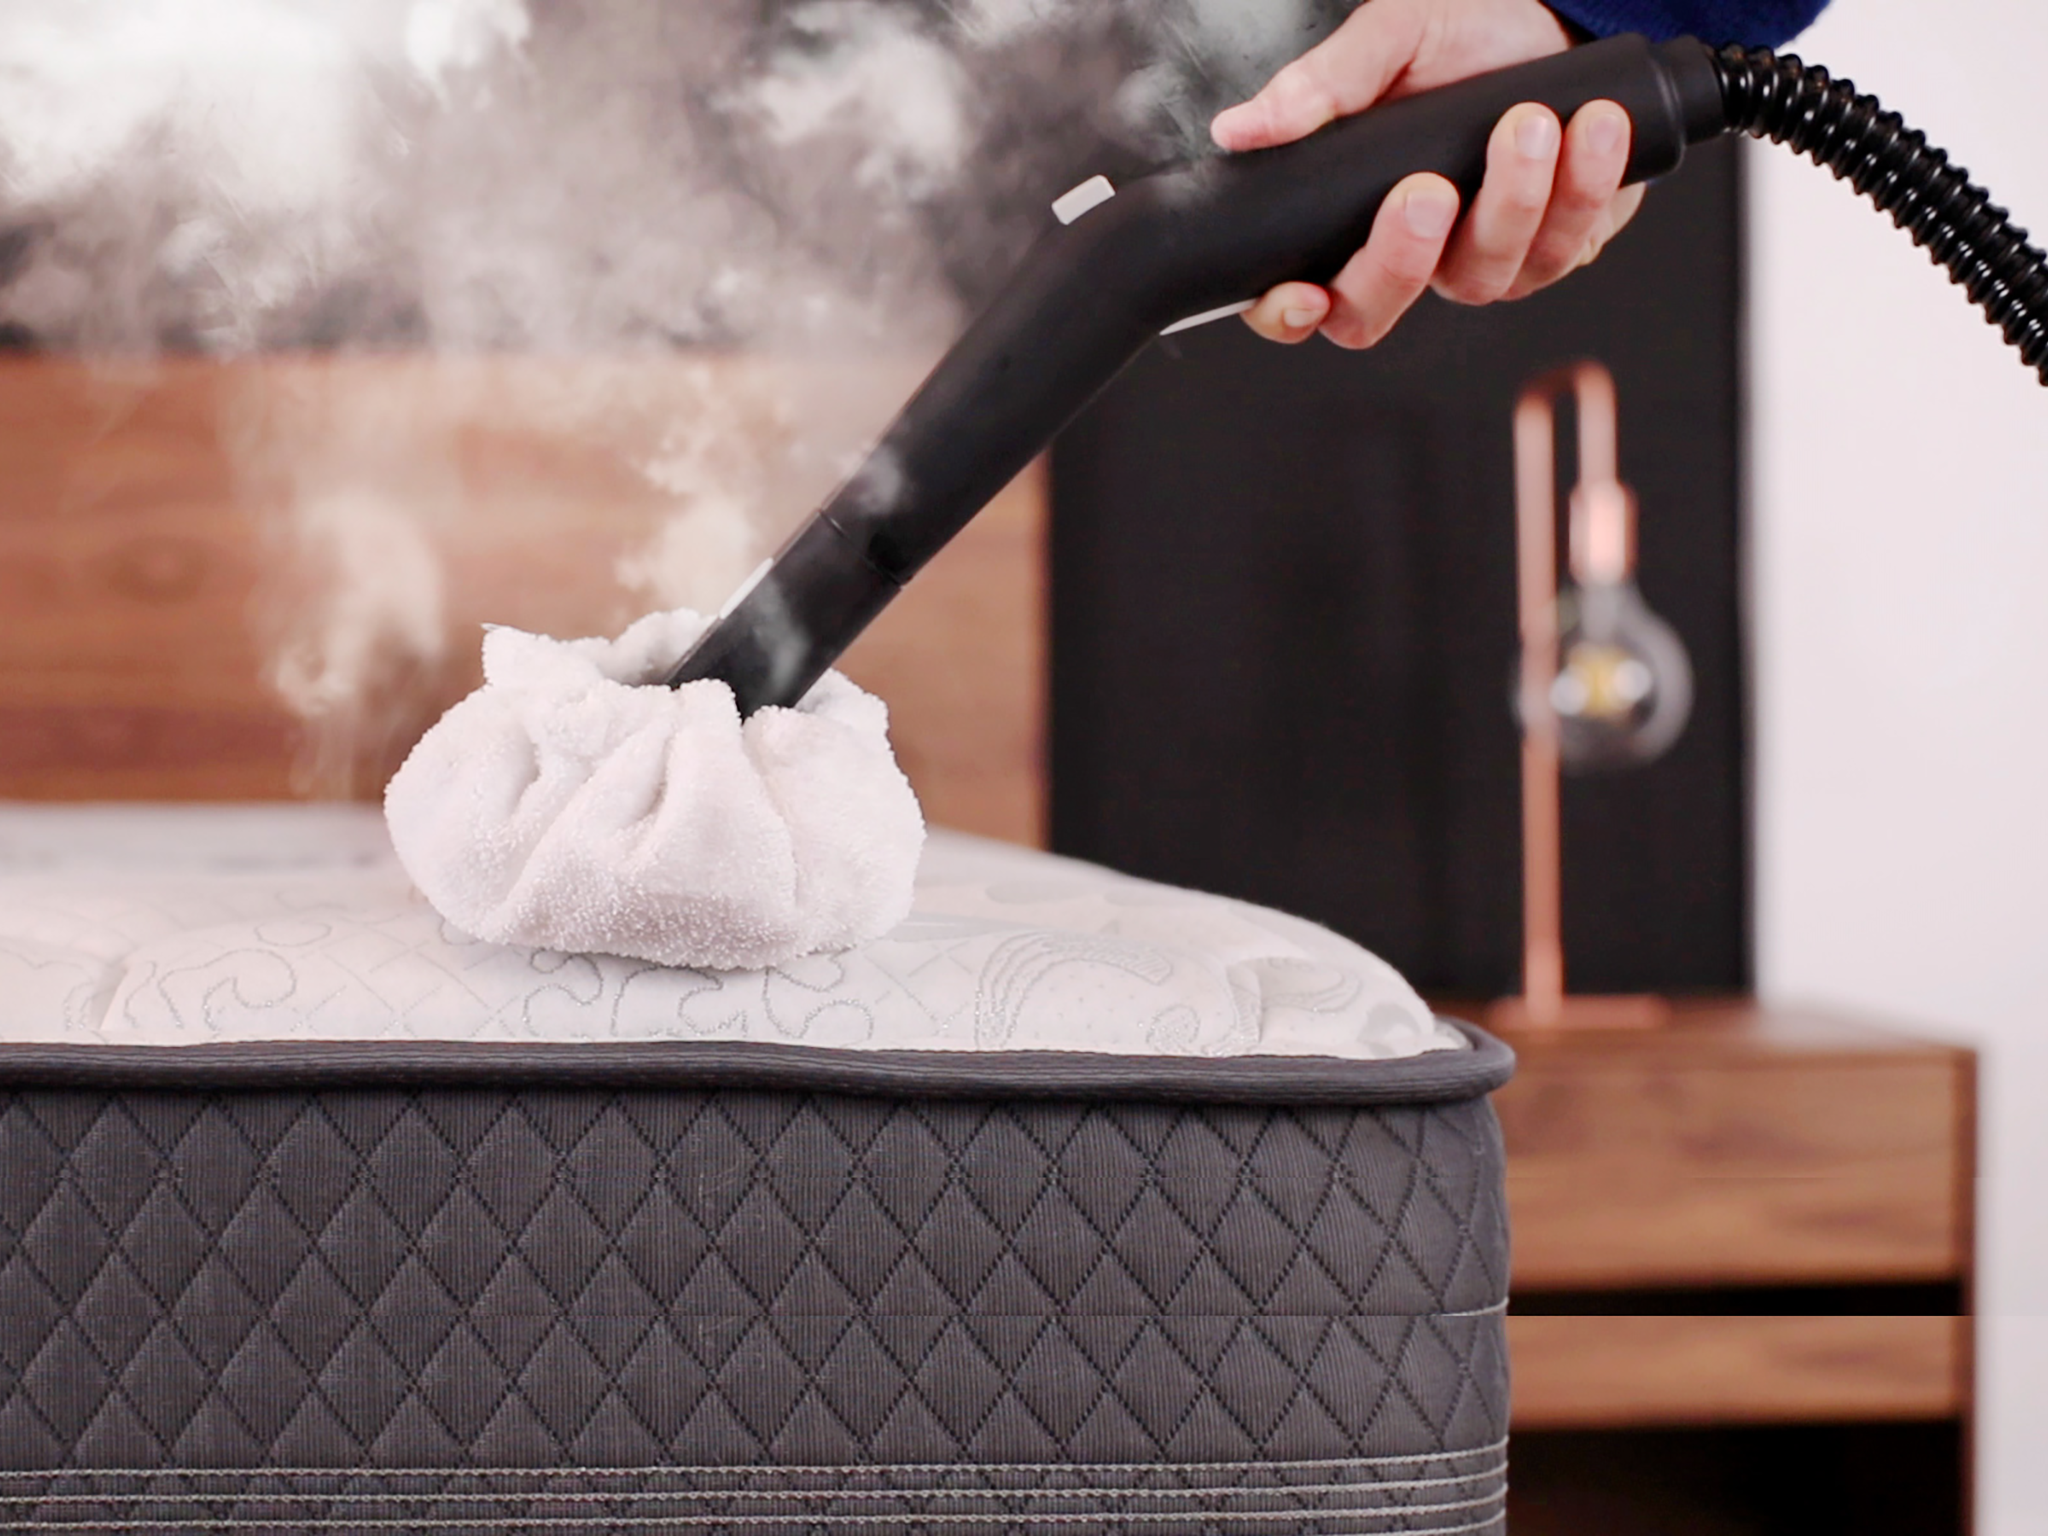 Steam Cleaners for Grout Cleaning - Dupray 